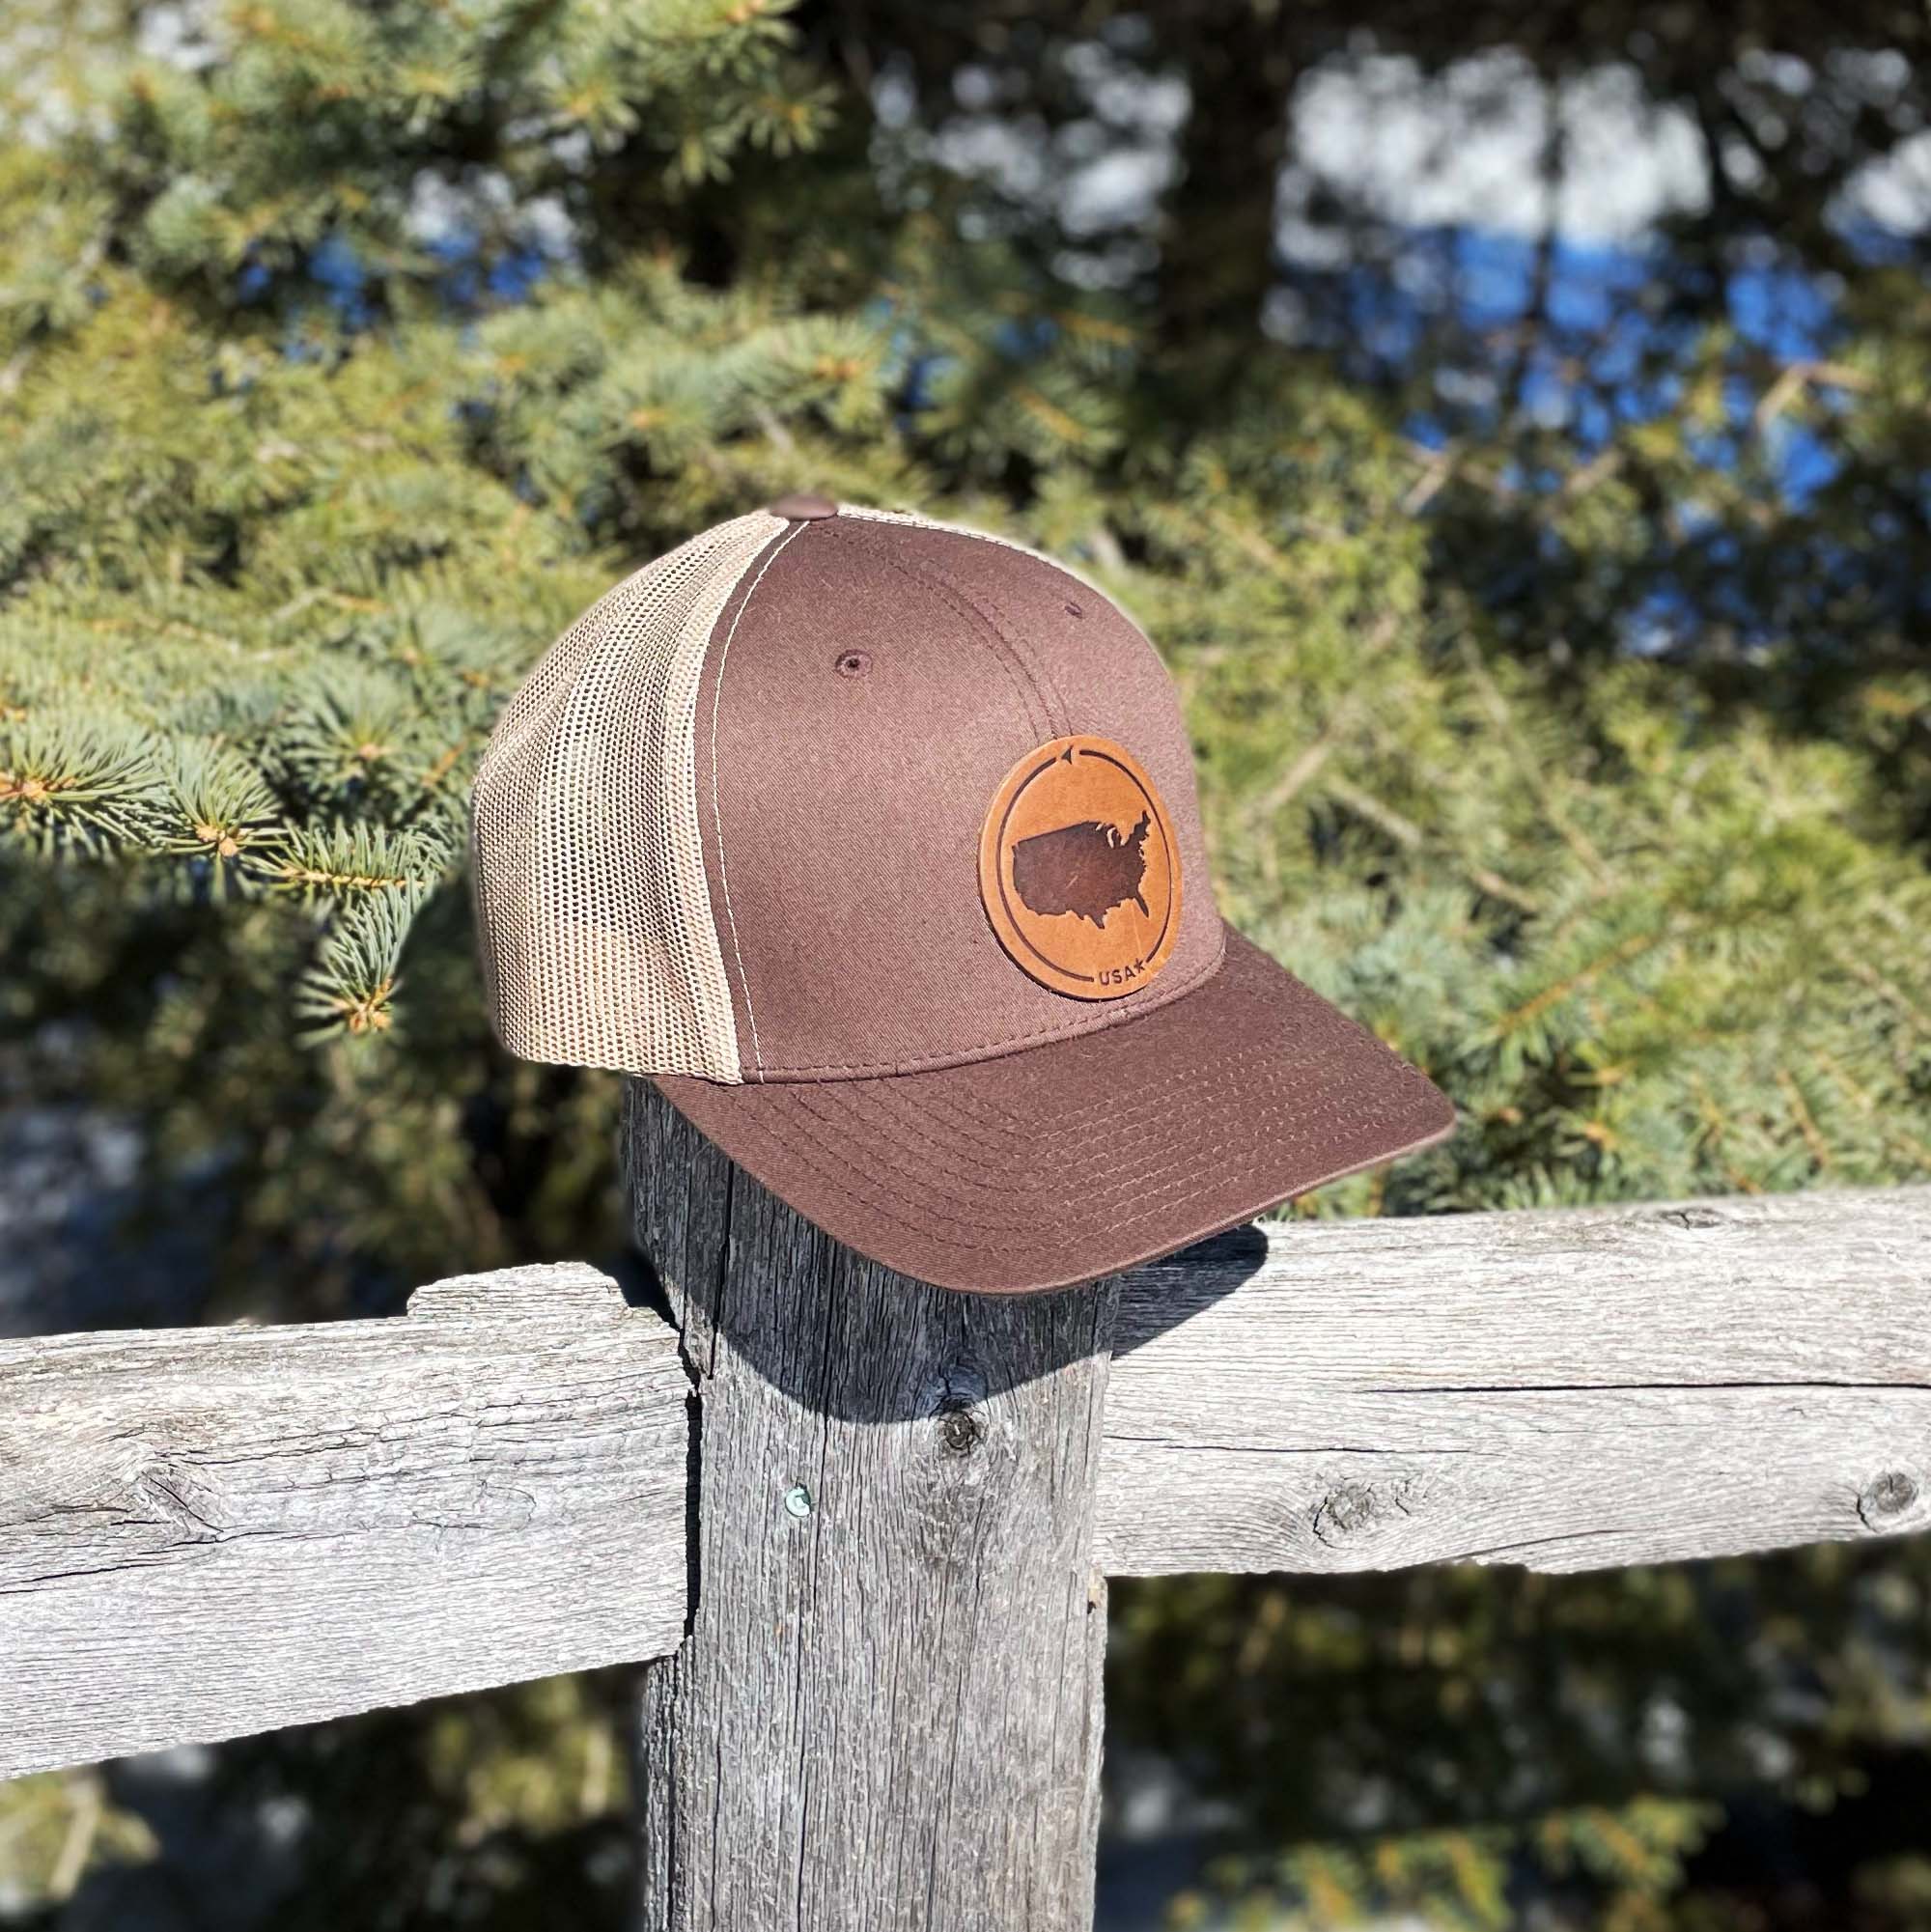 Custom Leather Ohio Flag Patch Hat. Ohio Leather Truck Hat. Laser Engraved Patch Hat. Light Tan / Gray/Black